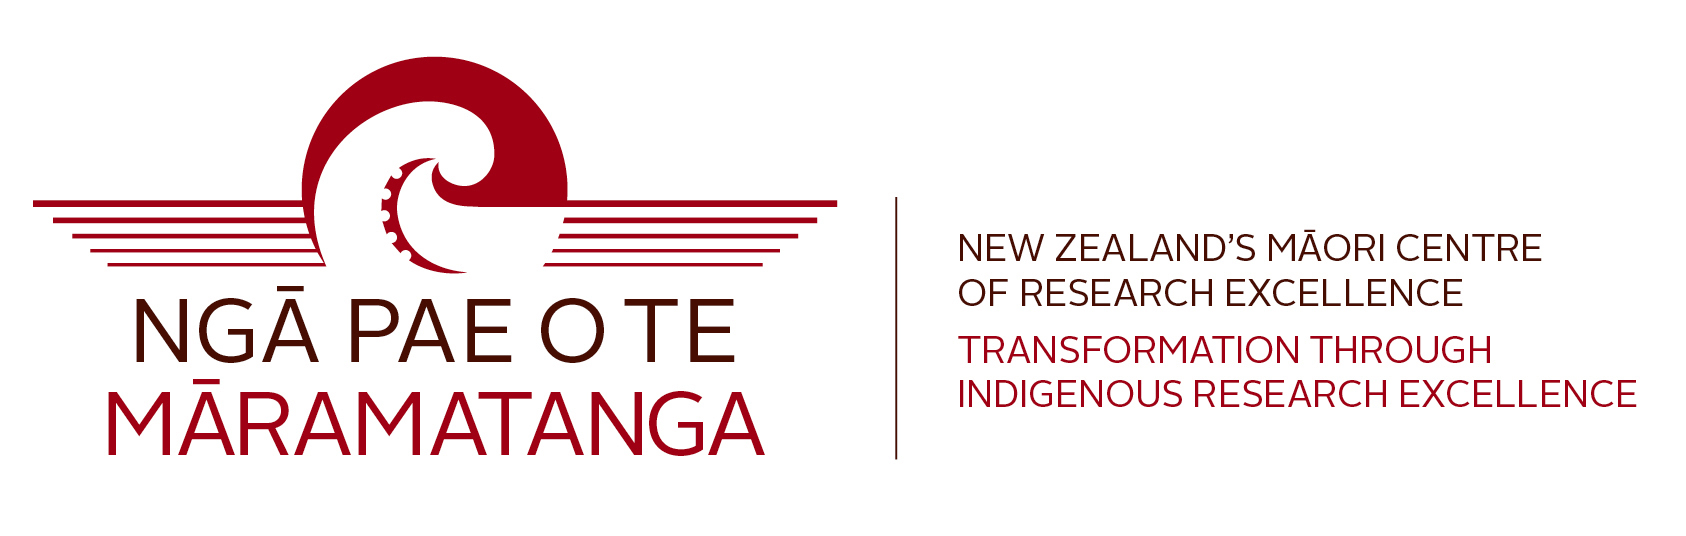 The 7th Biennial Ngā Pae o te Māramatanga conference will be held in Auckland, NZ from 15 - 18 November 2016. The conference themes will be Indigenous Economies. Research into the Natural Environment and Human Flourishing.